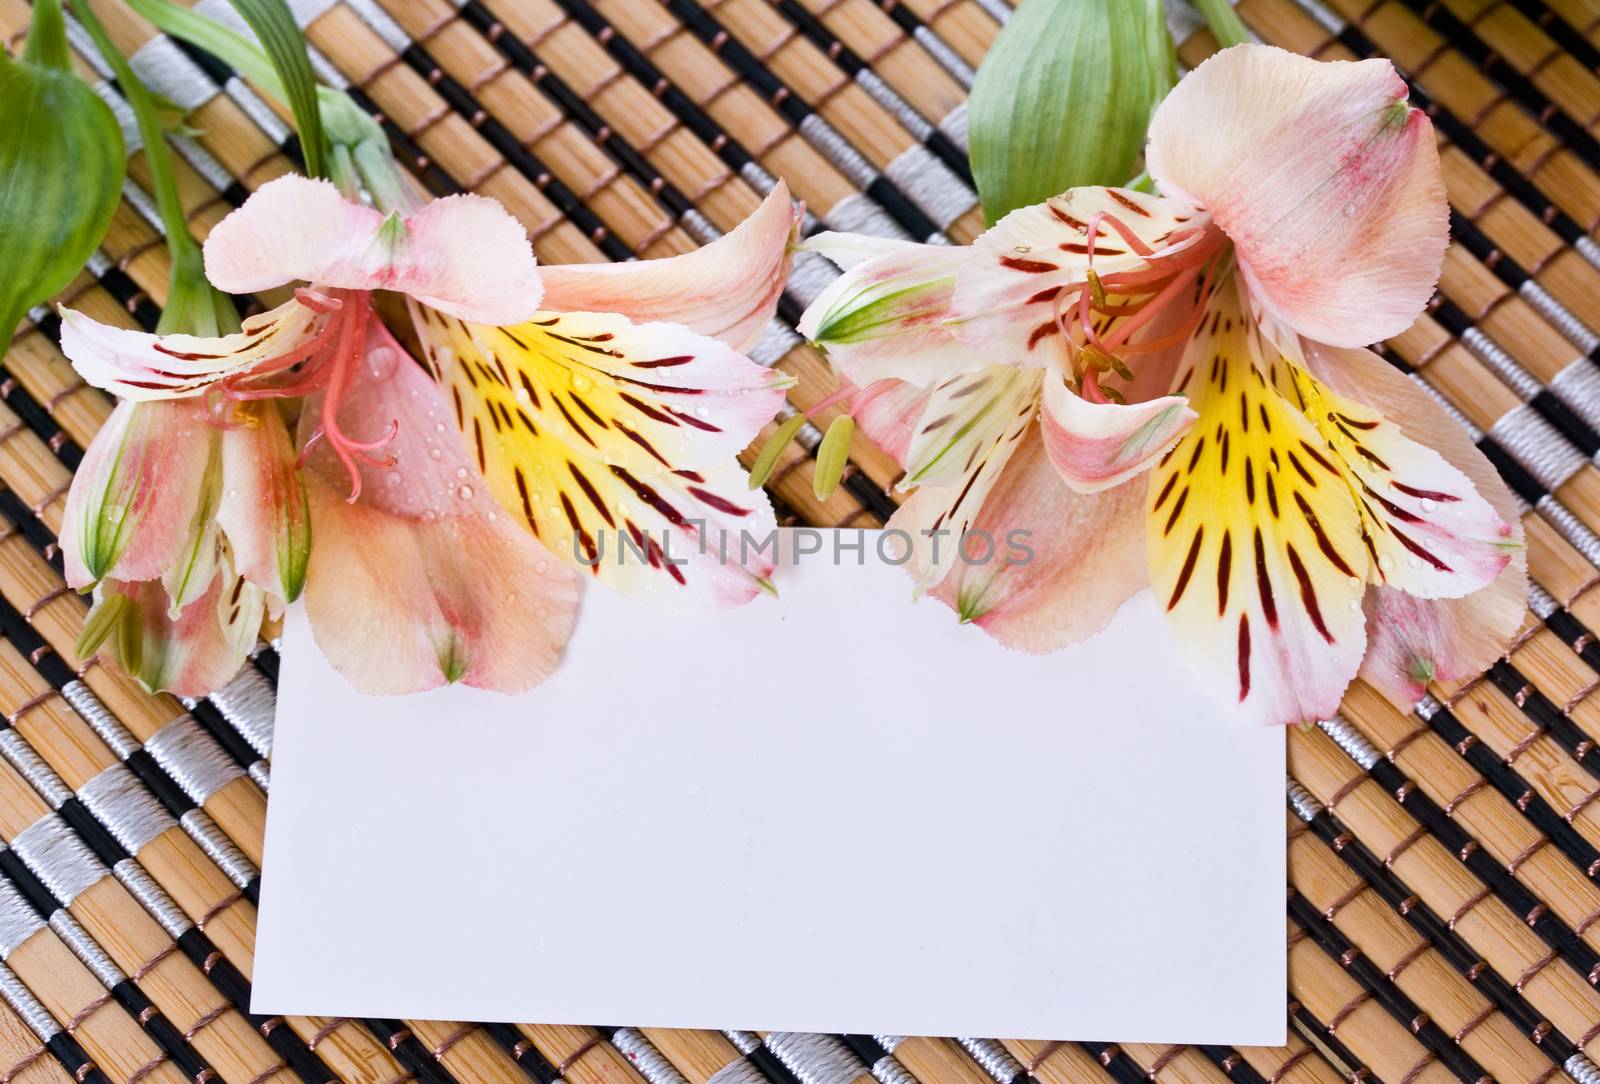 Alstroemeria flowers with a white card for a message.